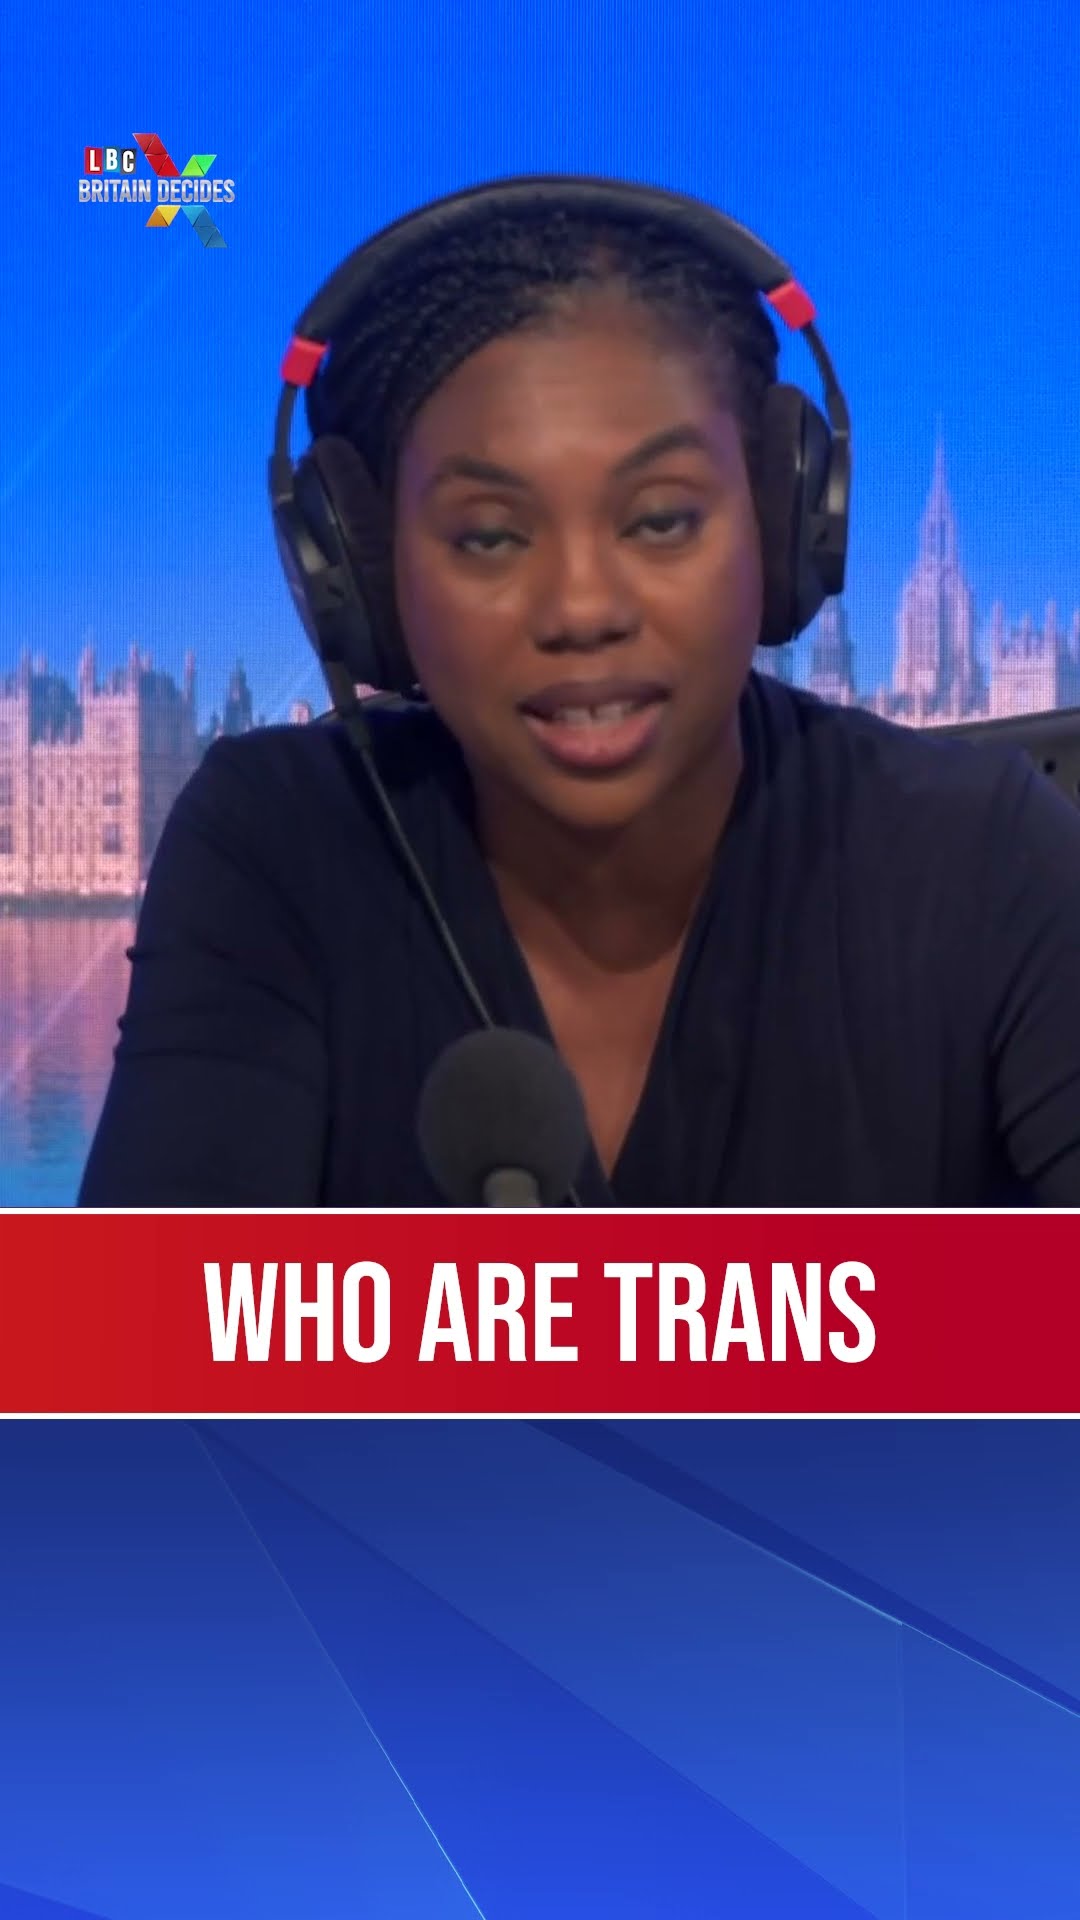 'Changing your clothes doesn't change who you are', says Kemi Badenoch  LBC